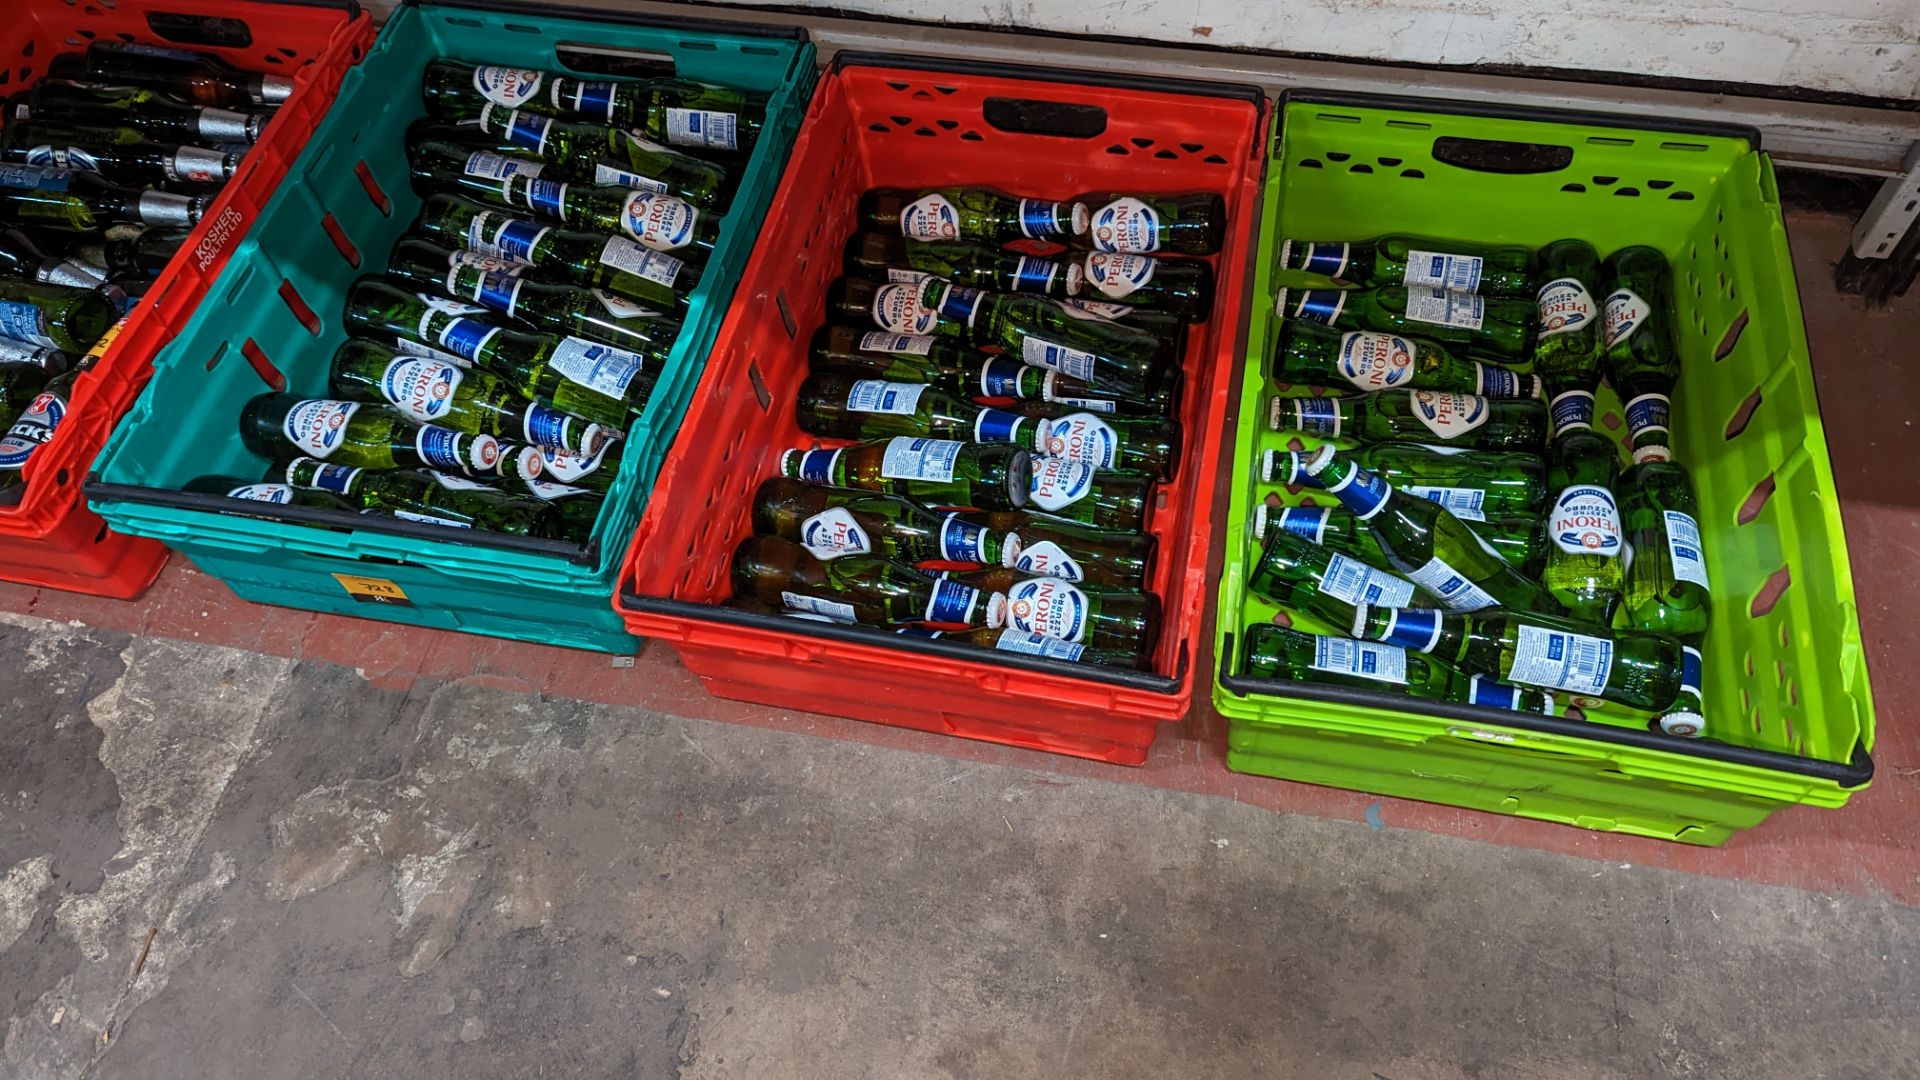 68 bottles of Peroni Nastro Azzurro beer (in 3 crates) sold under AWRS number XQAW00000101017 - Image 2 of 6